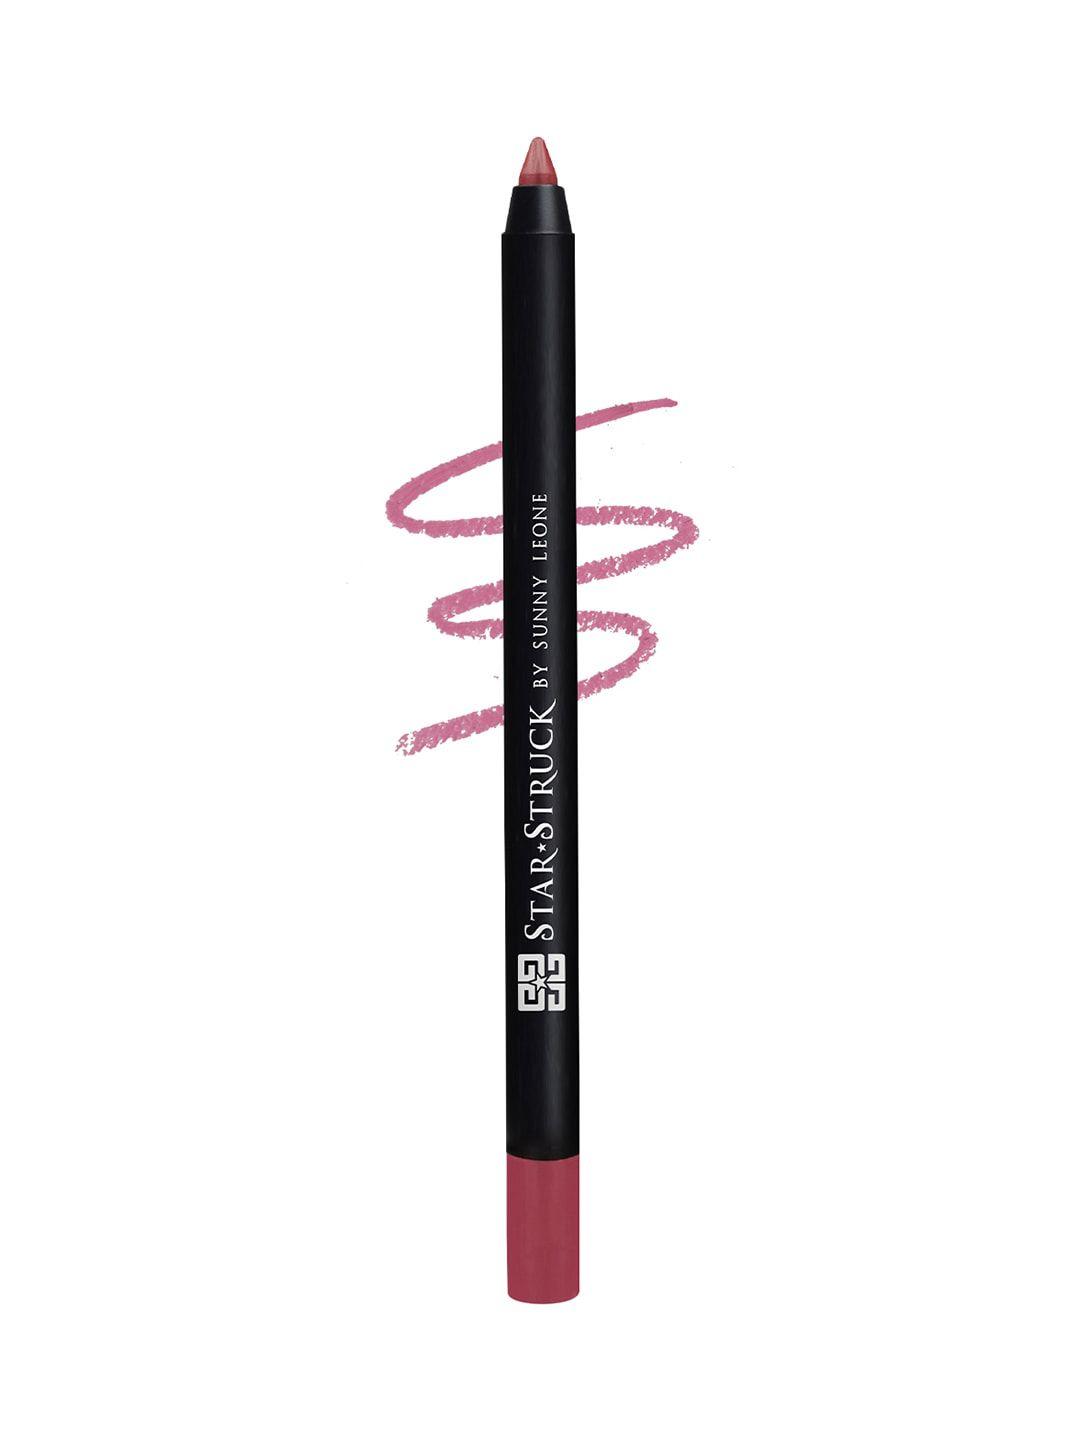 star struck by sunny leone make your lips pop water resistant lip liner - sugar plum